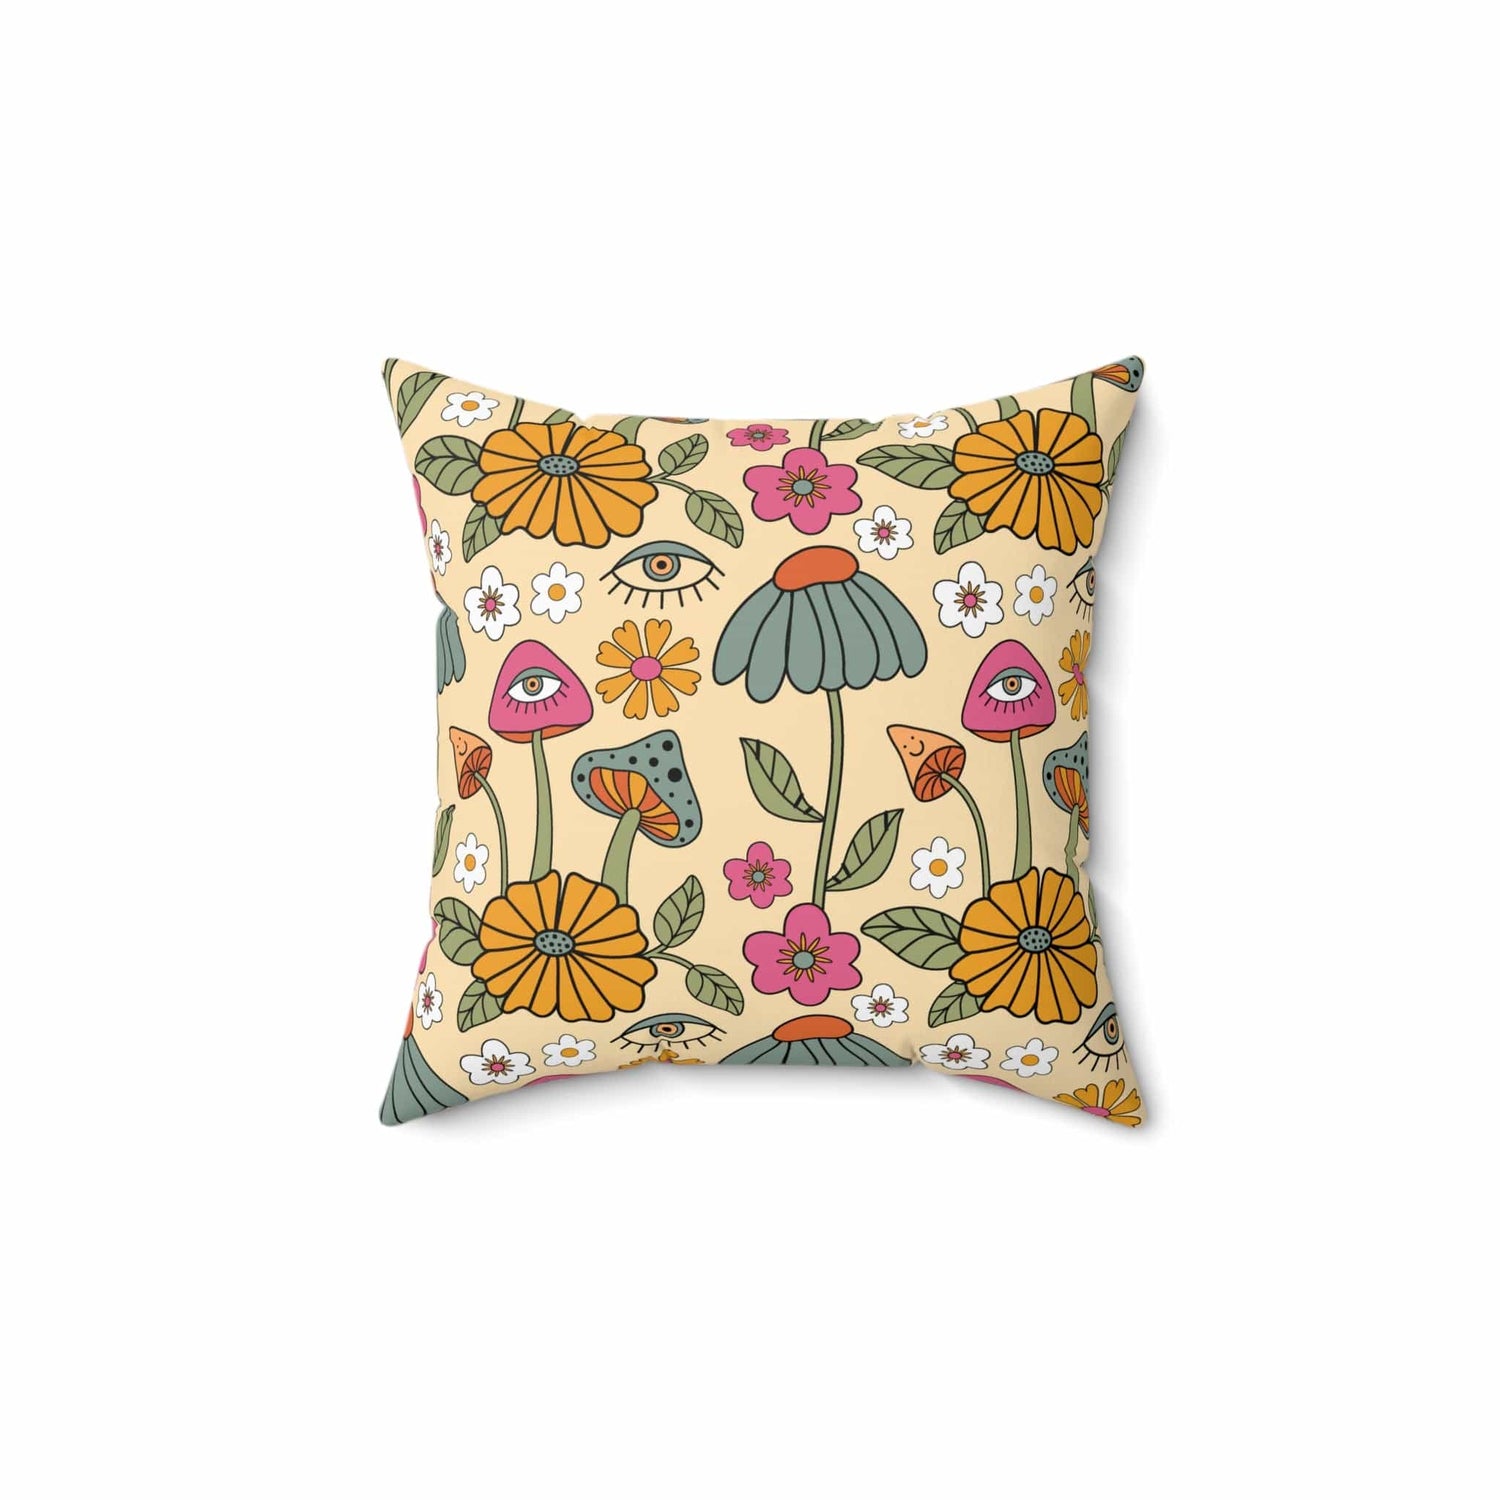 Kate McEnroe New York Hippie Mushroom Cottagecore Aesthetic Throw Pillow with Insert, Retro Floral 70s Psychedelic Accent Pillow Throw Pillows